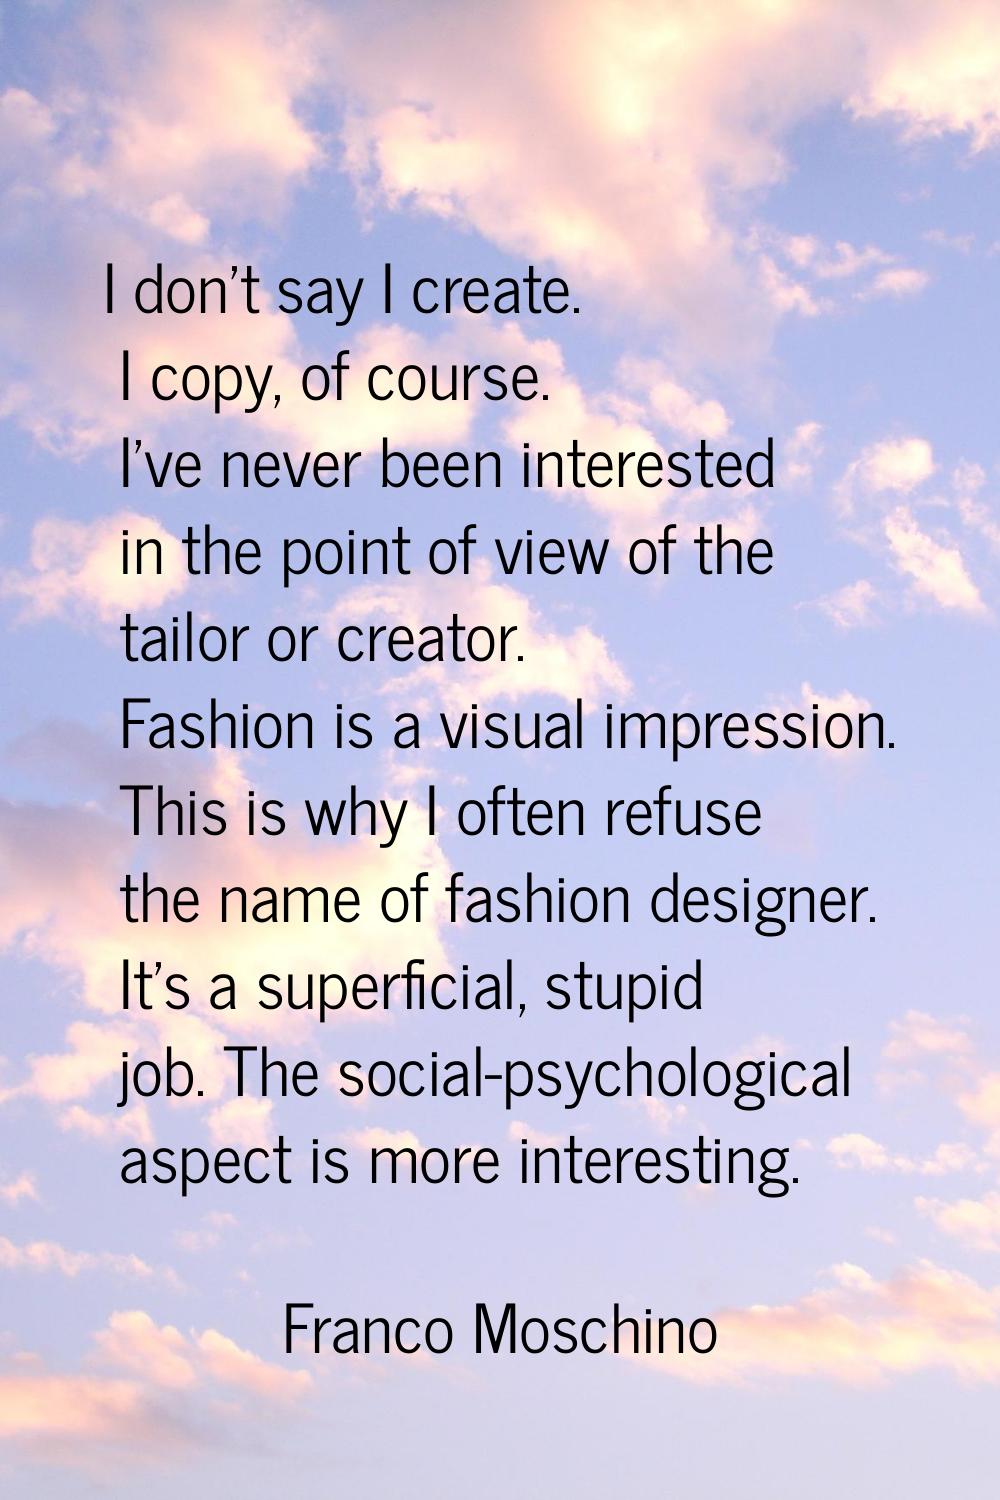 I don't say I create. I copy, of course. I've never been interested in the point of view of the tai